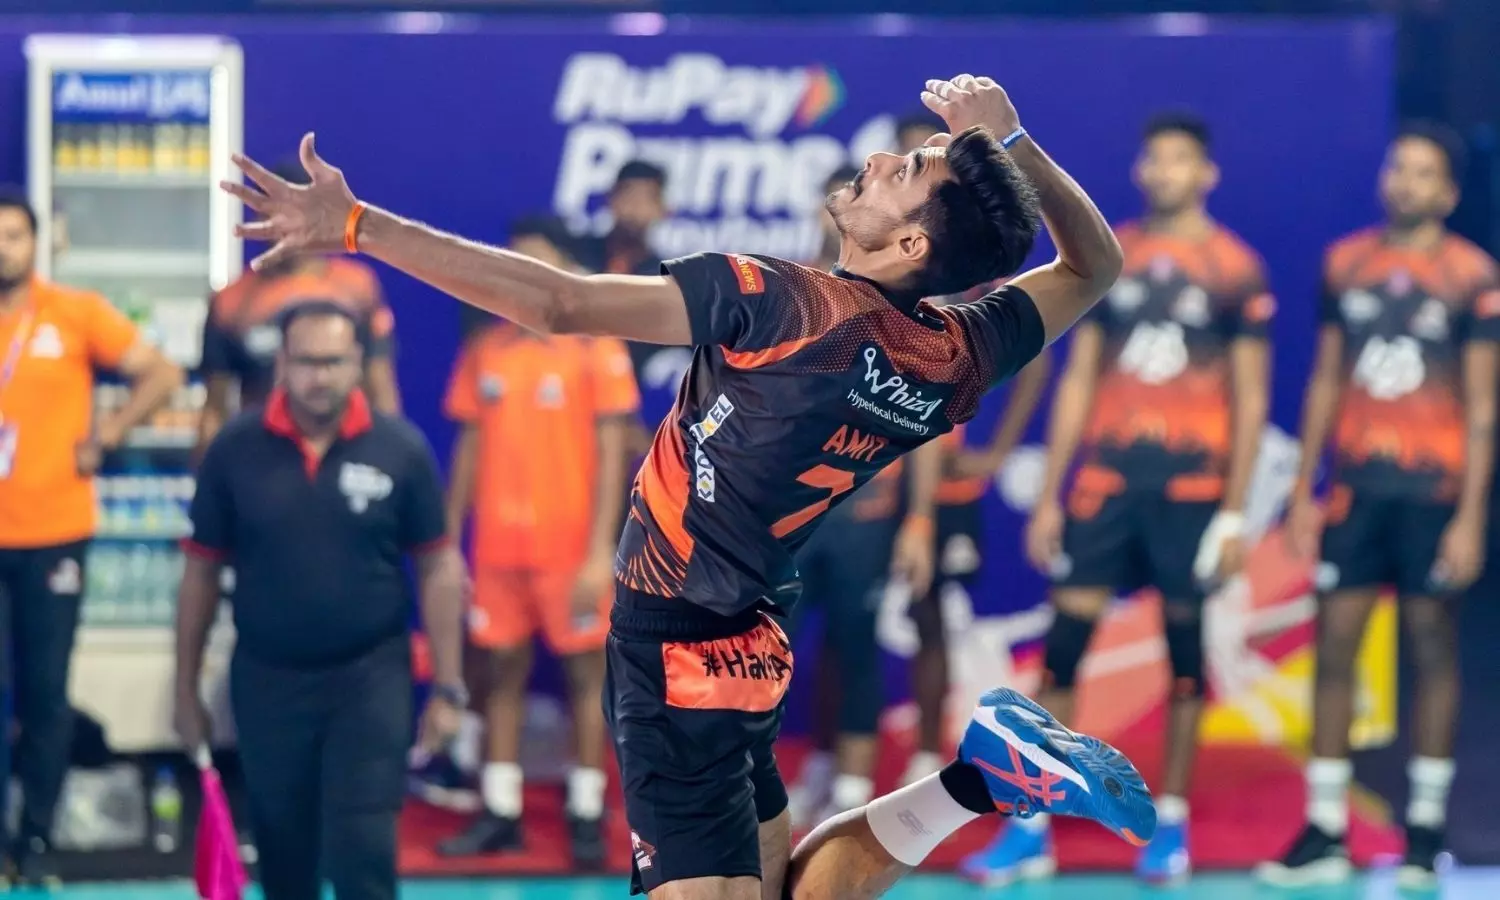 Prime Volleyball League Calicut Heroes win 5-0 against Hyderabad Black Hawks LIVE